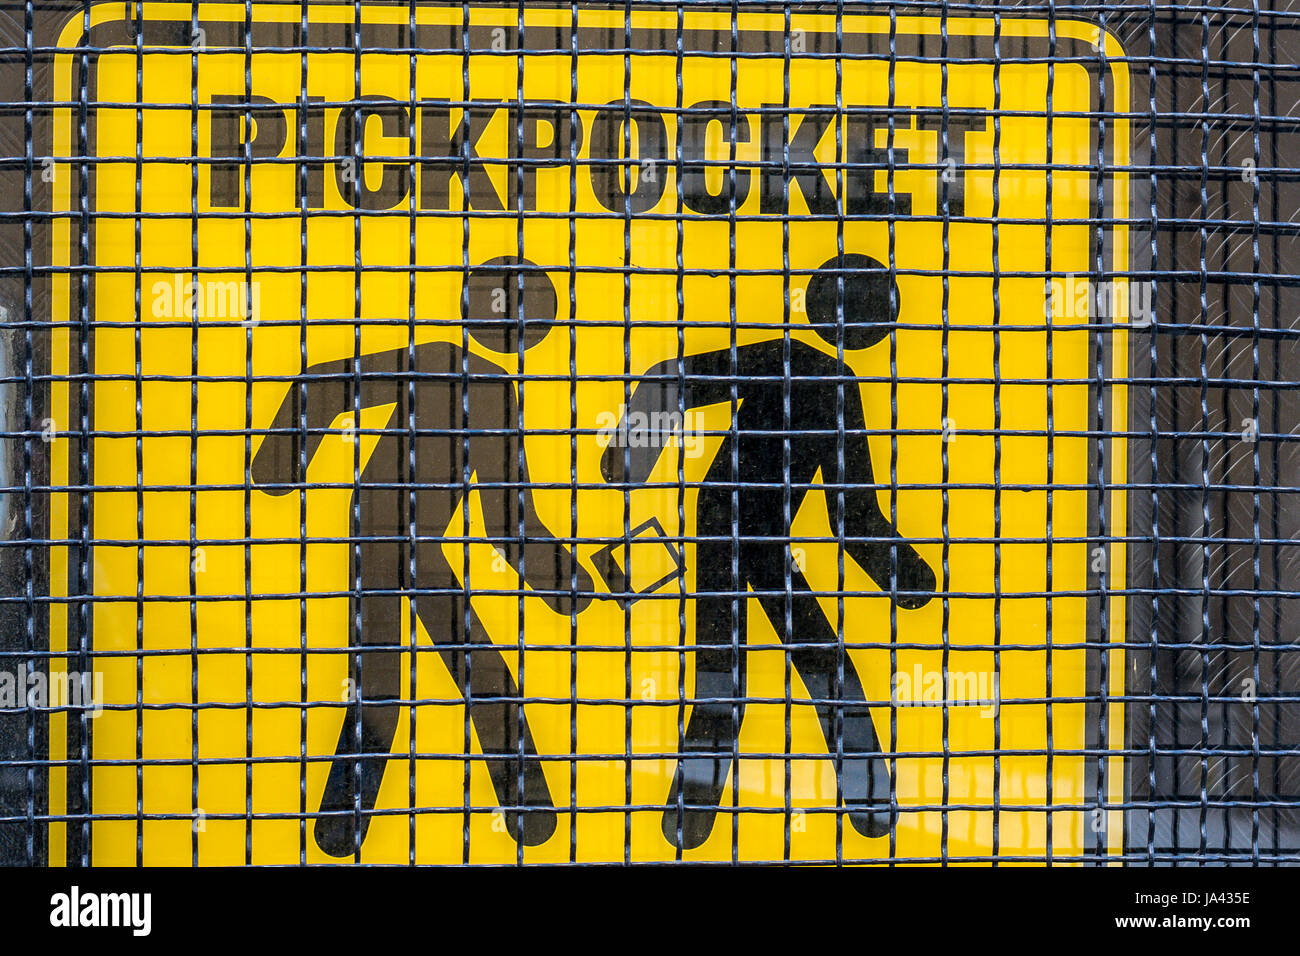 Pickpocket gallery - a warning sign black on yellow background Stock Photo